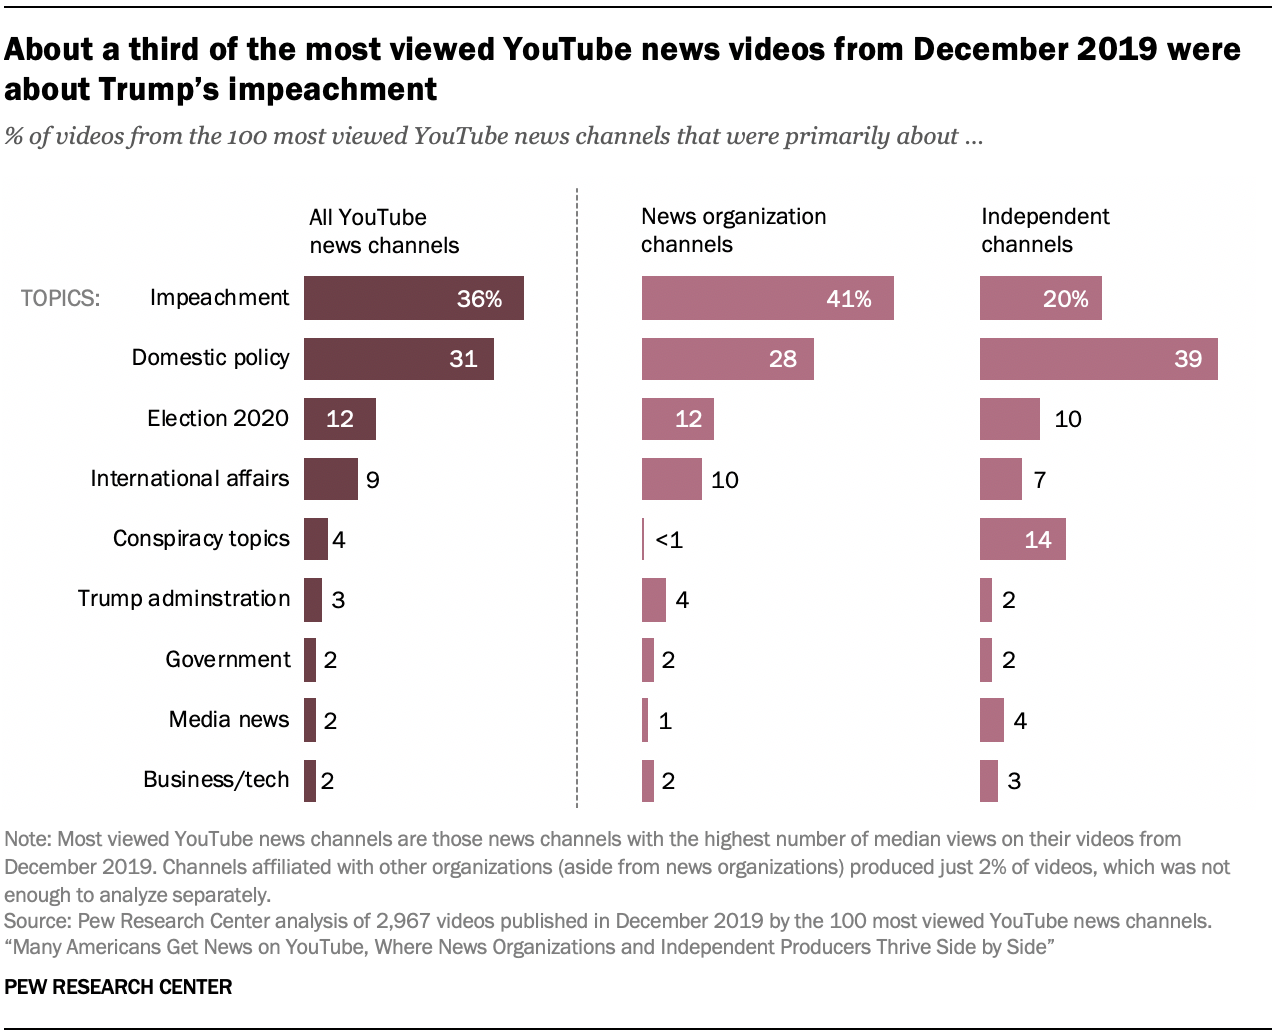 About a third of the most viewed YouTube news videos from December 2019 were about Trump’s impeachment